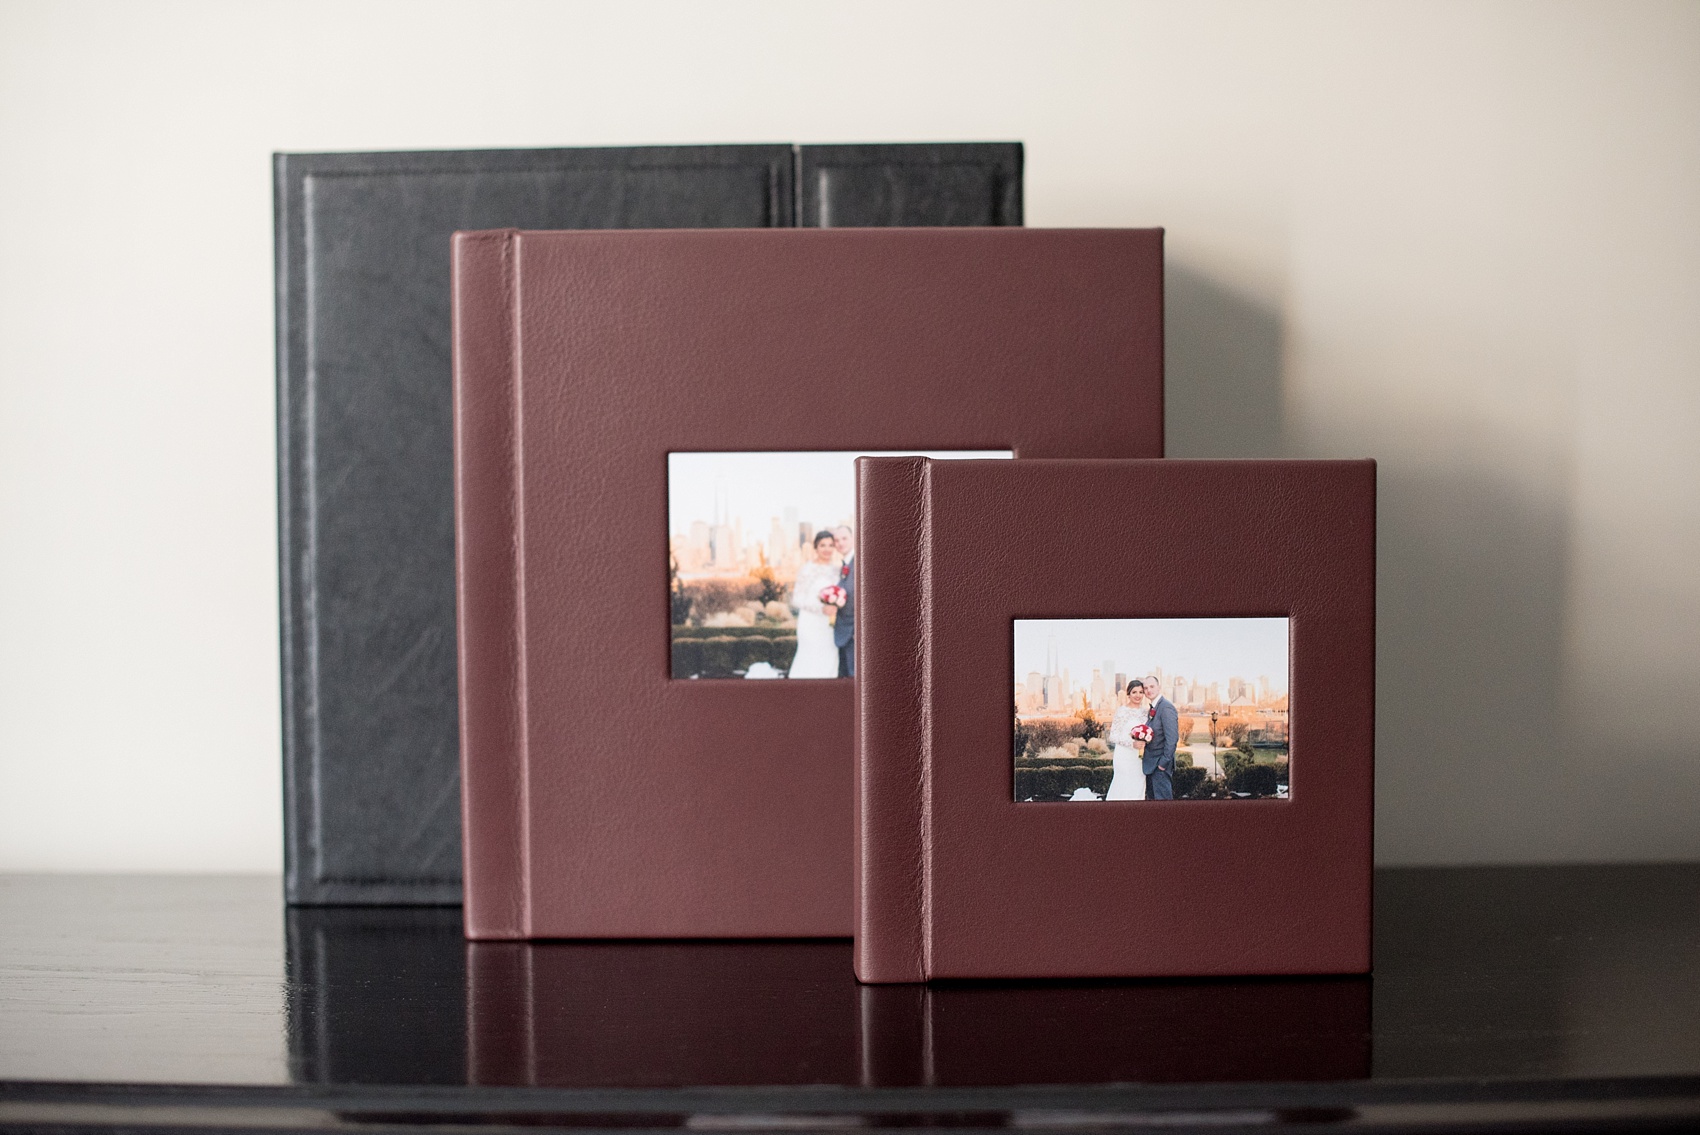 Mikkel Paige Photography photos of a fine art leather Madera wedding album in Oxblood. 12x12" album for the bride and groom and 8x8" parent albums.